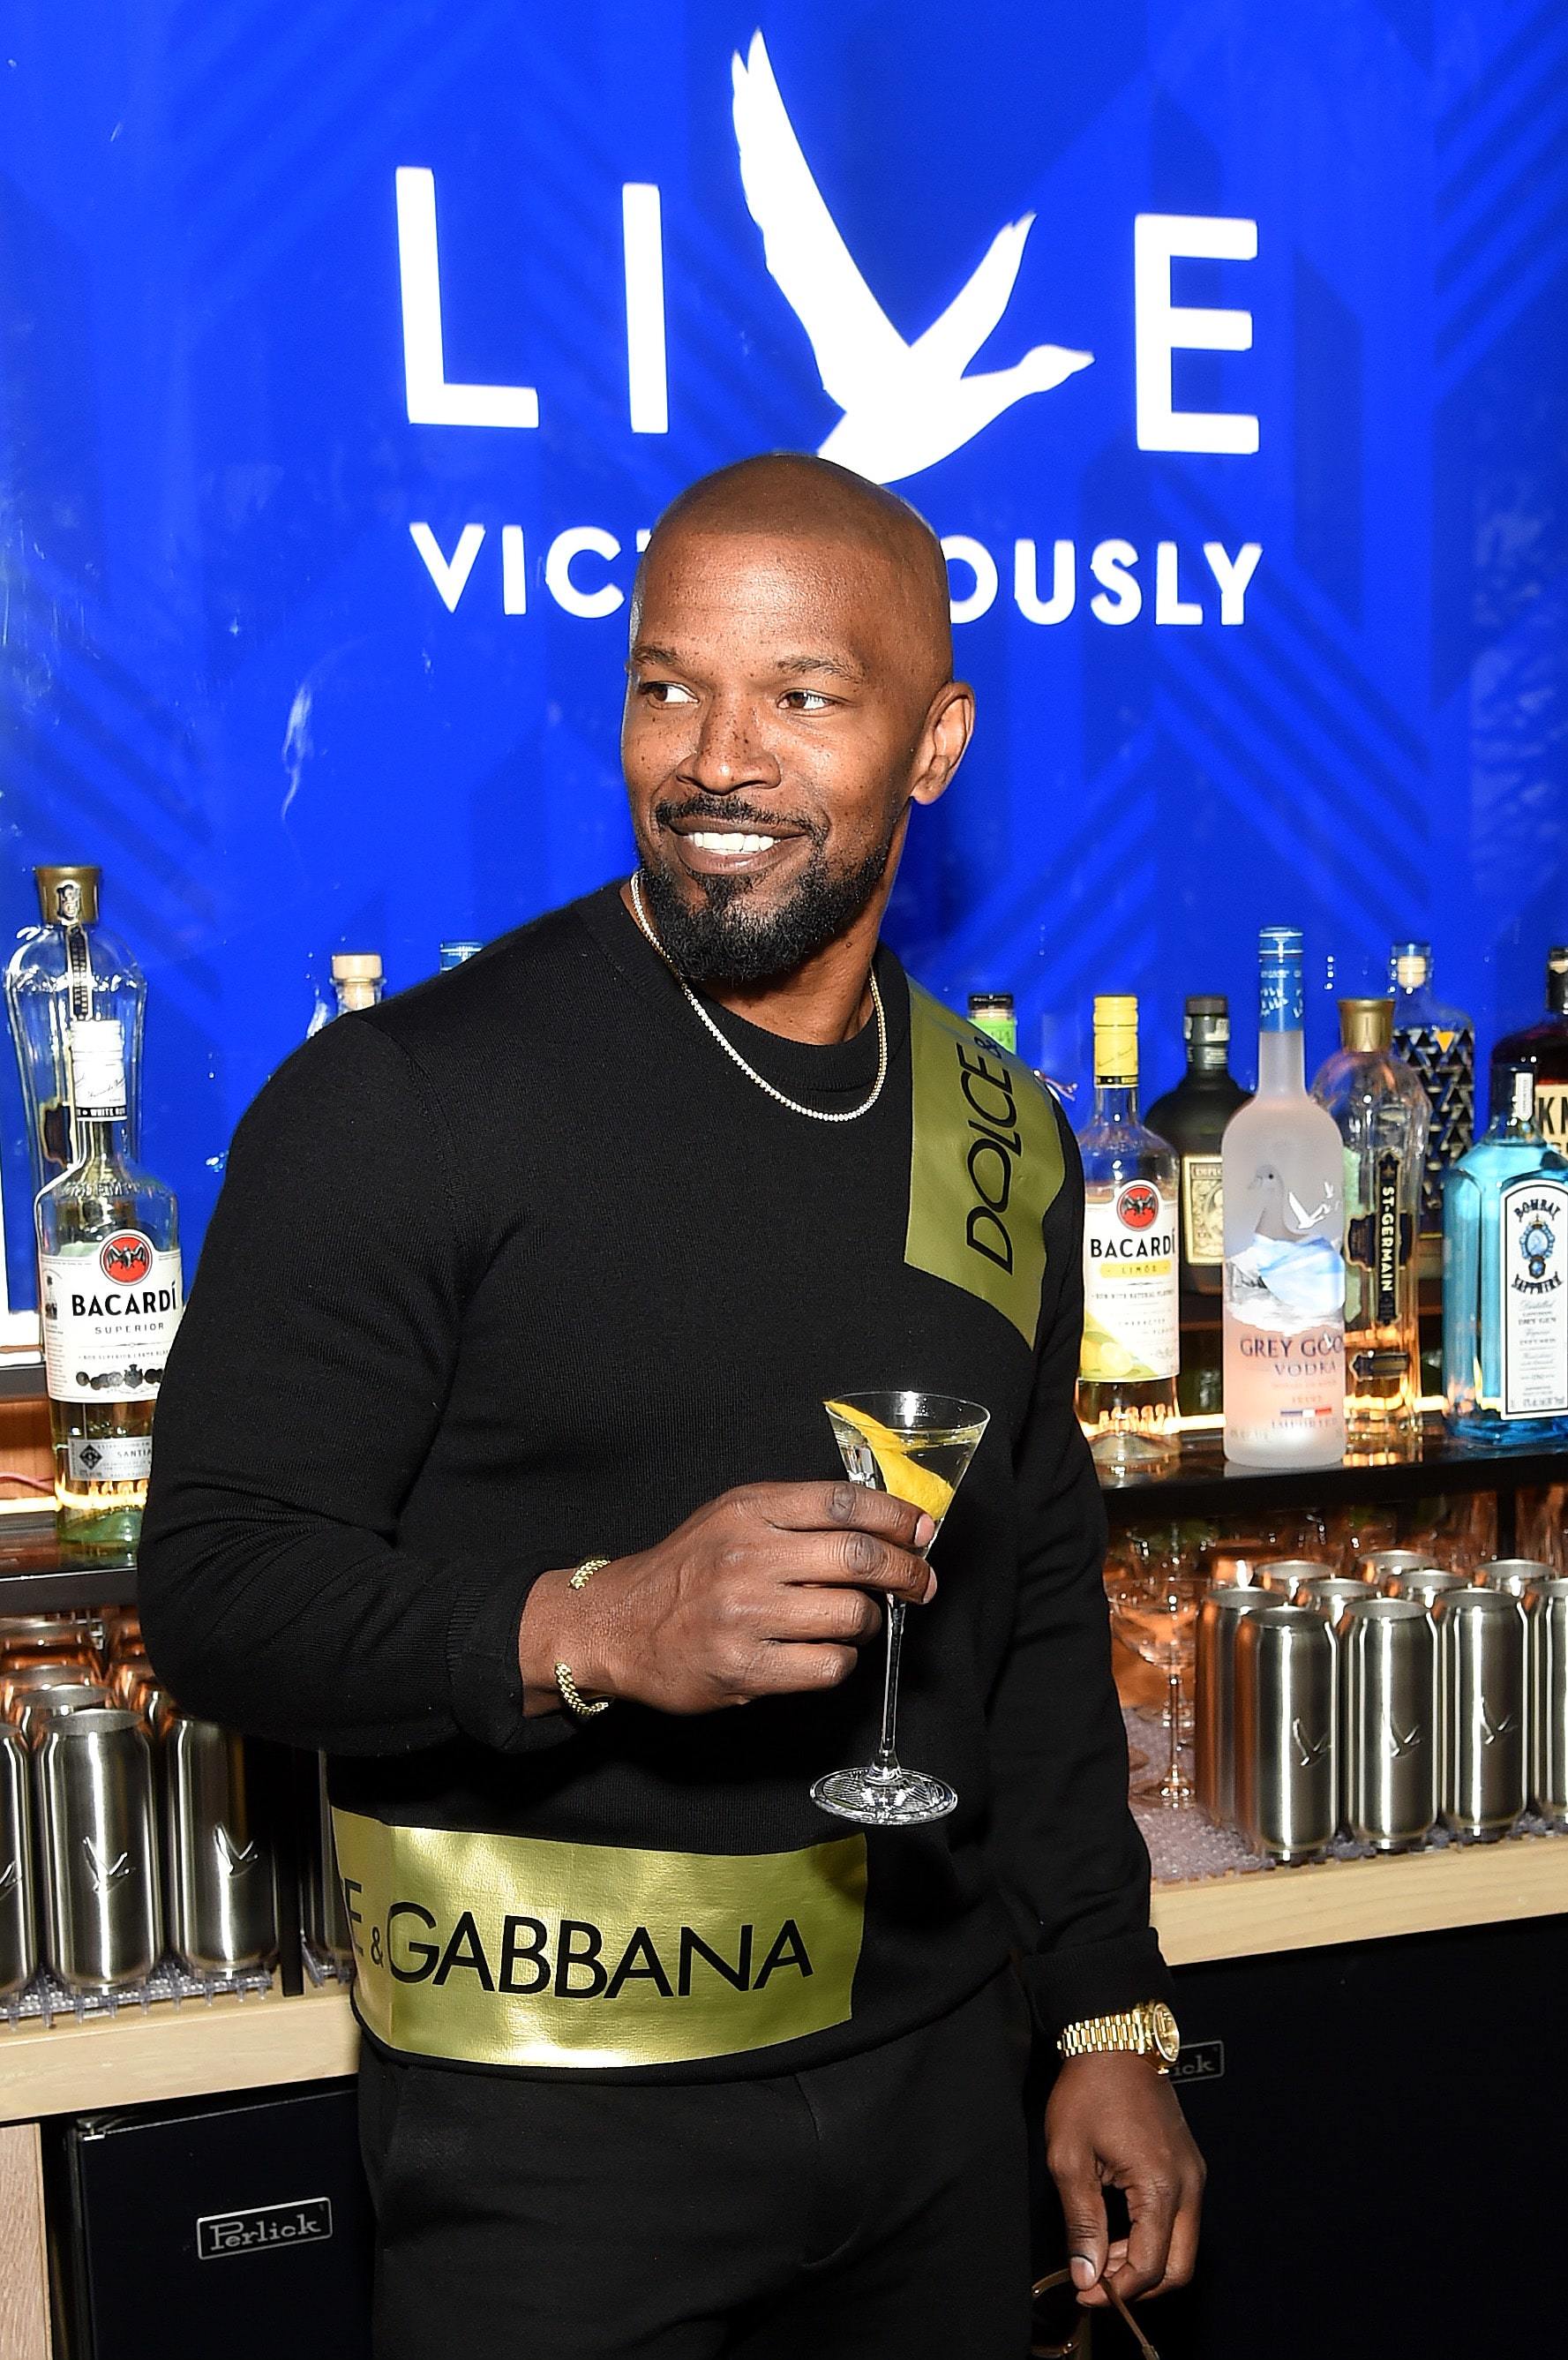 Jamie Foxx Says He’s Embarking On New Stand-Up Comedy Tour ‘Kill The Comedian’